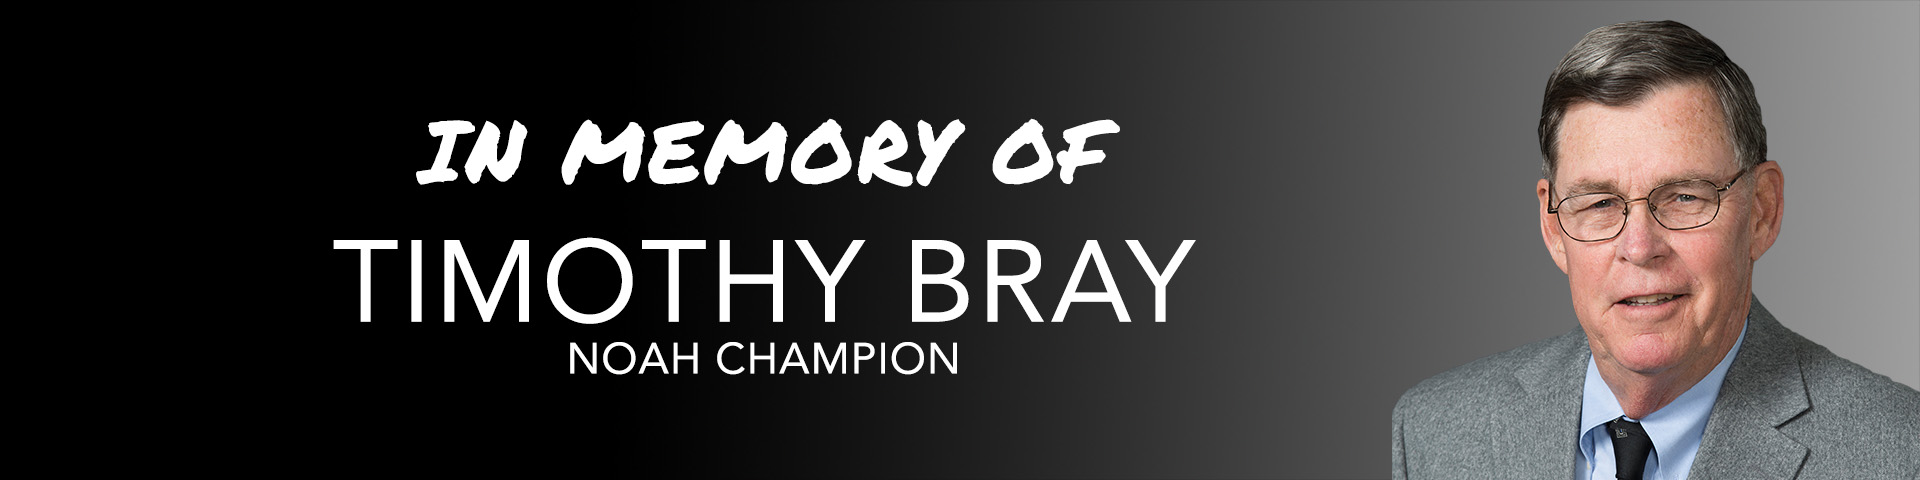 In Memory of Timothy Bray